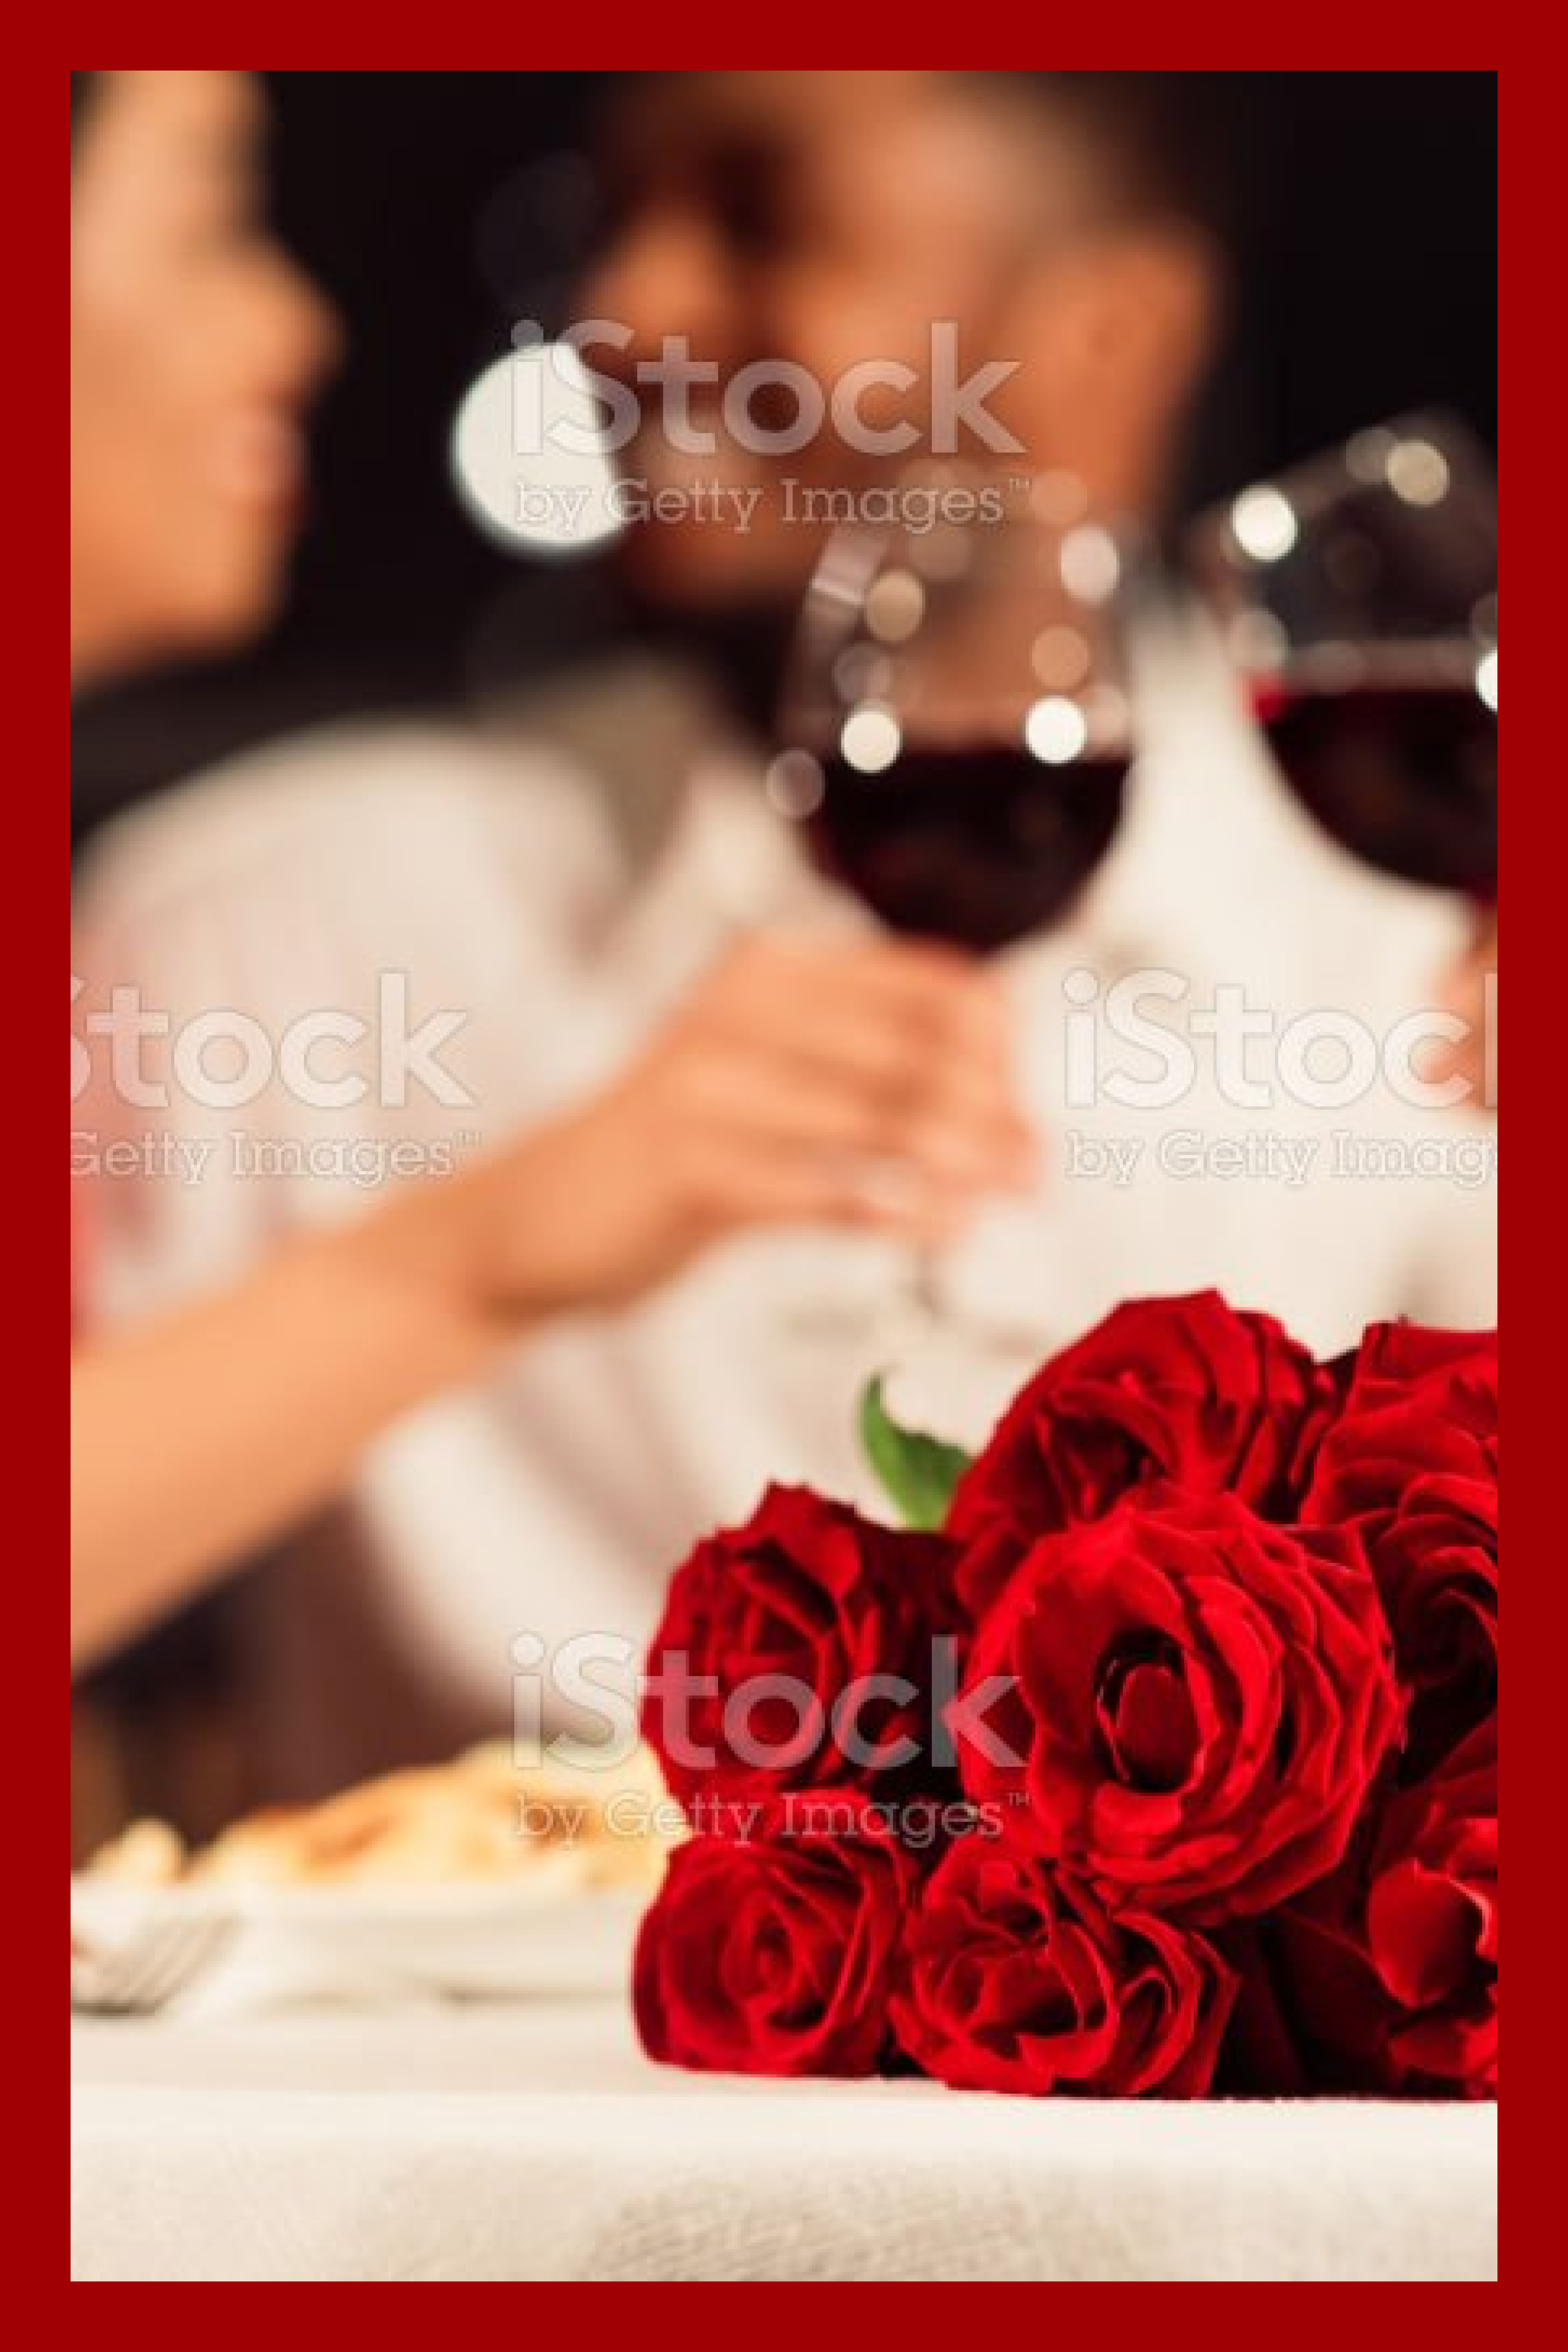 A high-quality photo of a couple in love with roses in the foreground..